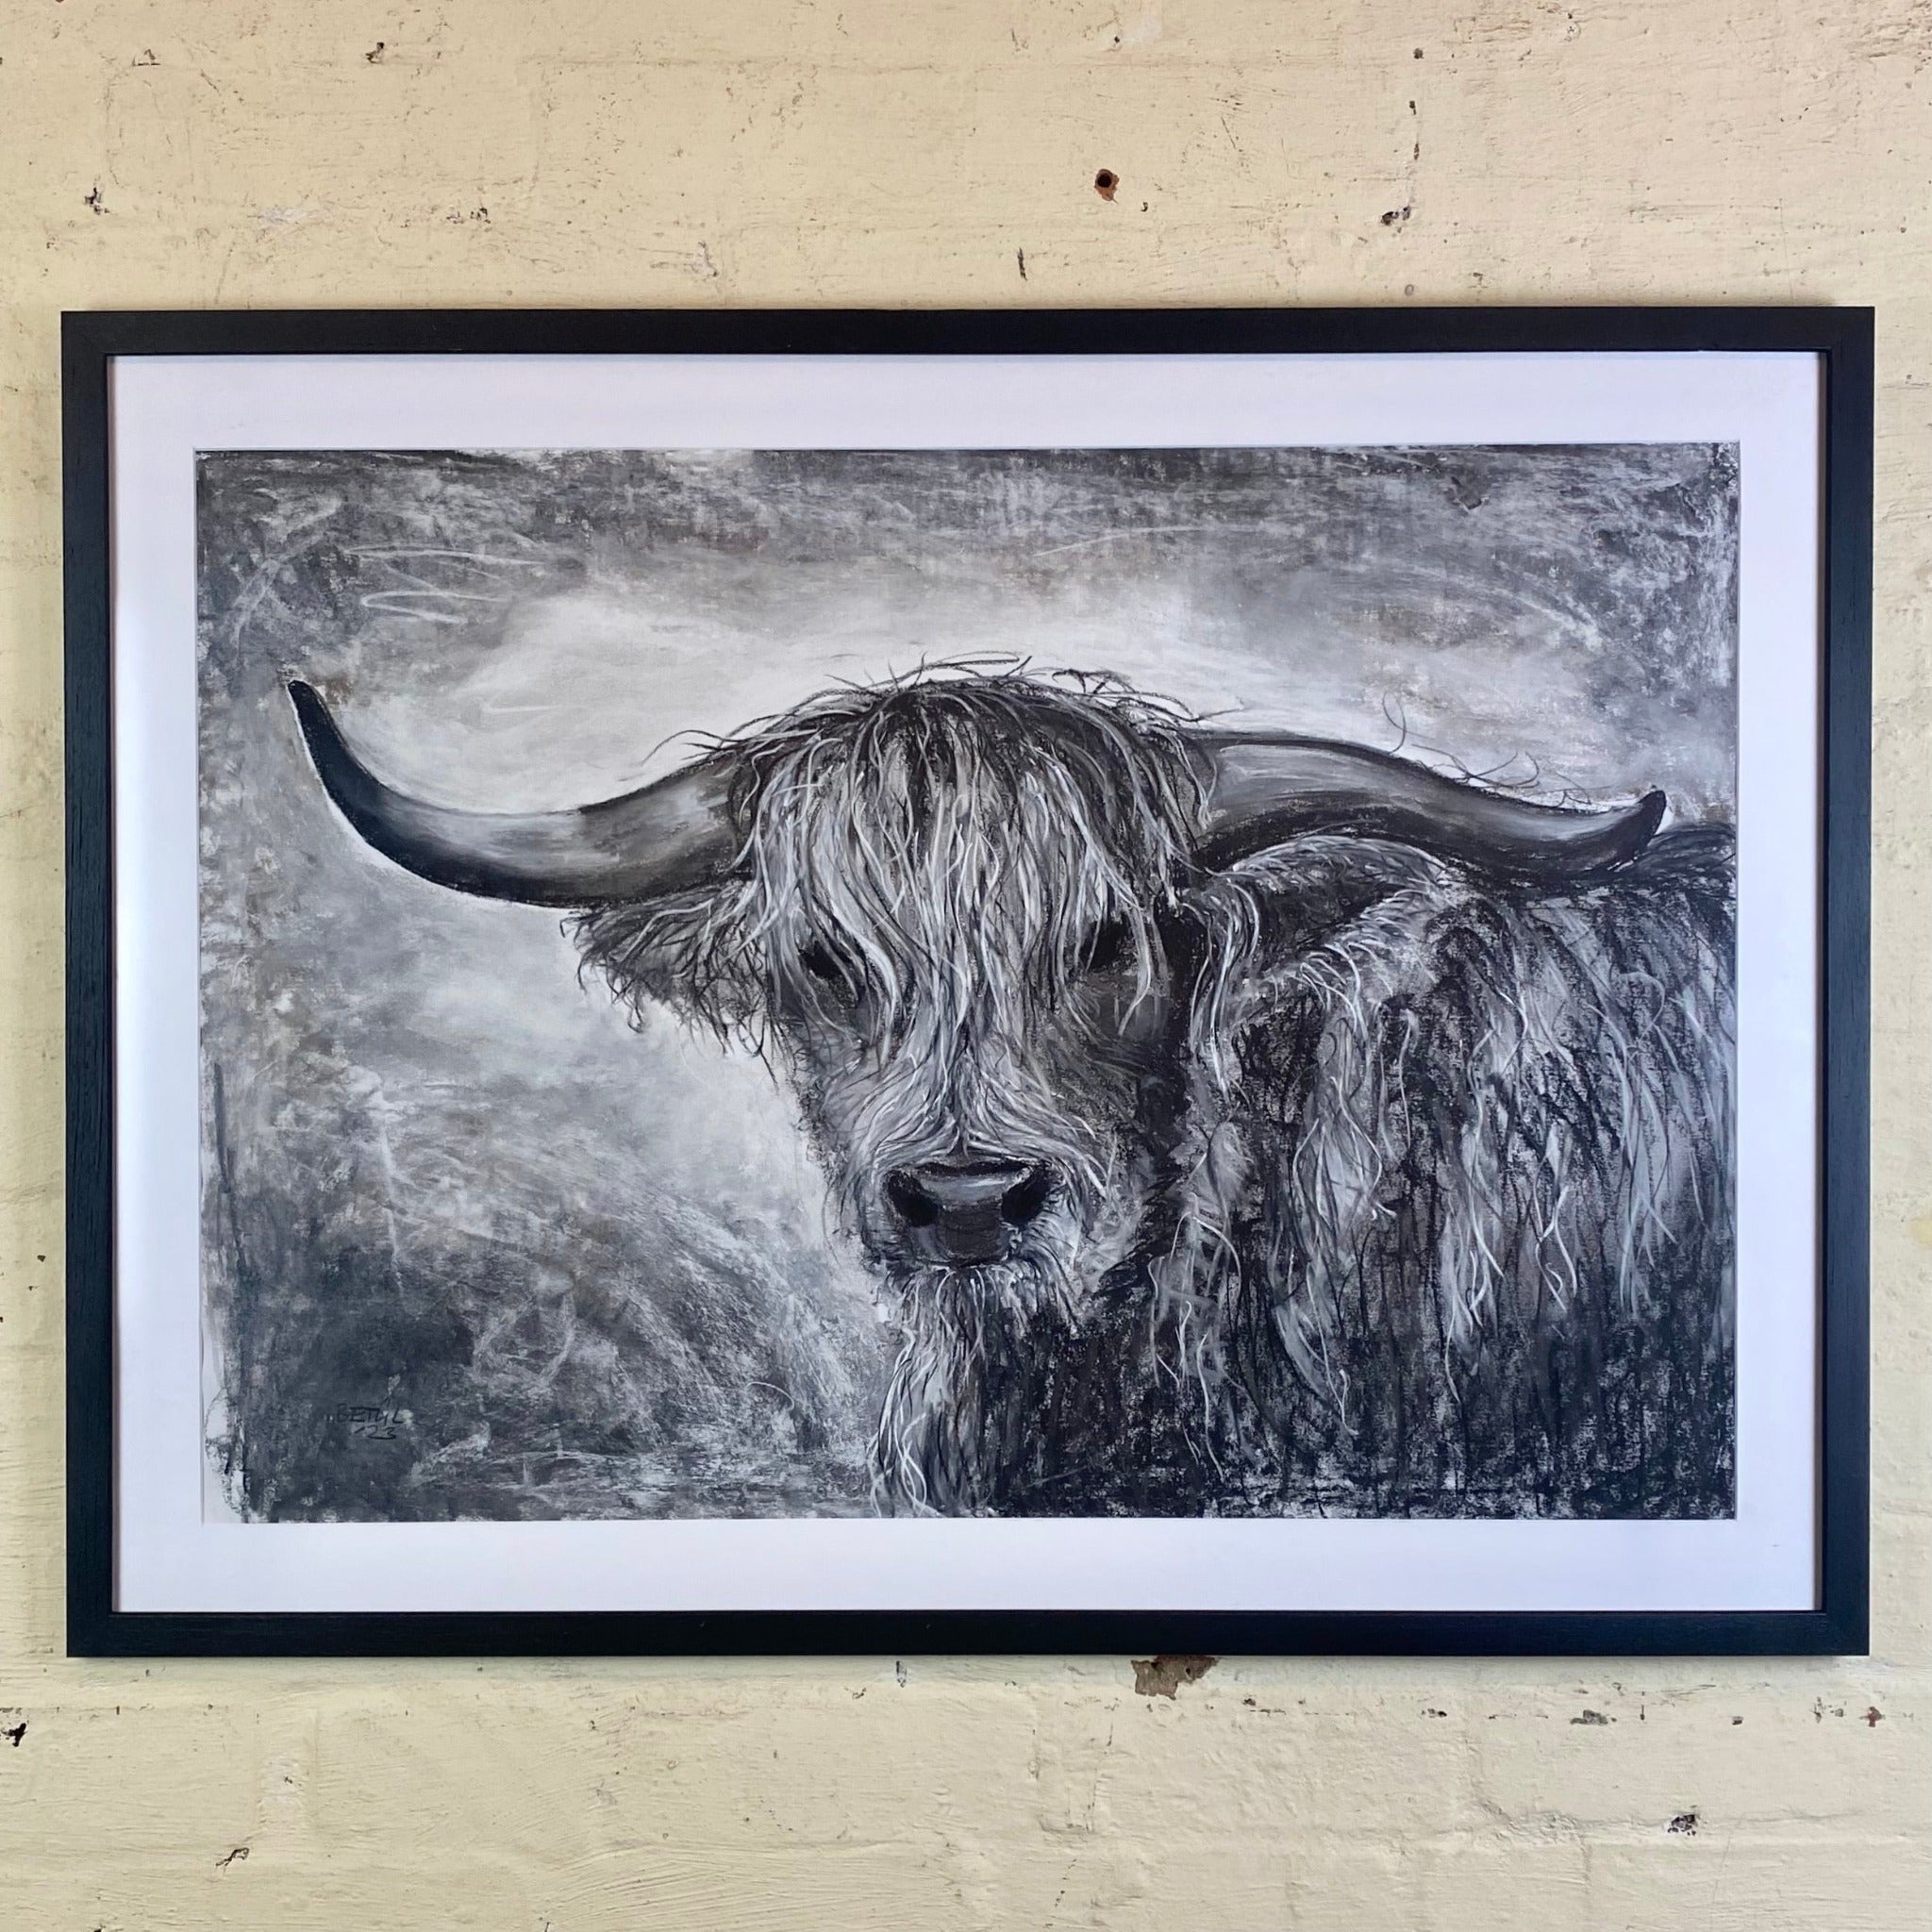 Black and white cow sketch in black frame